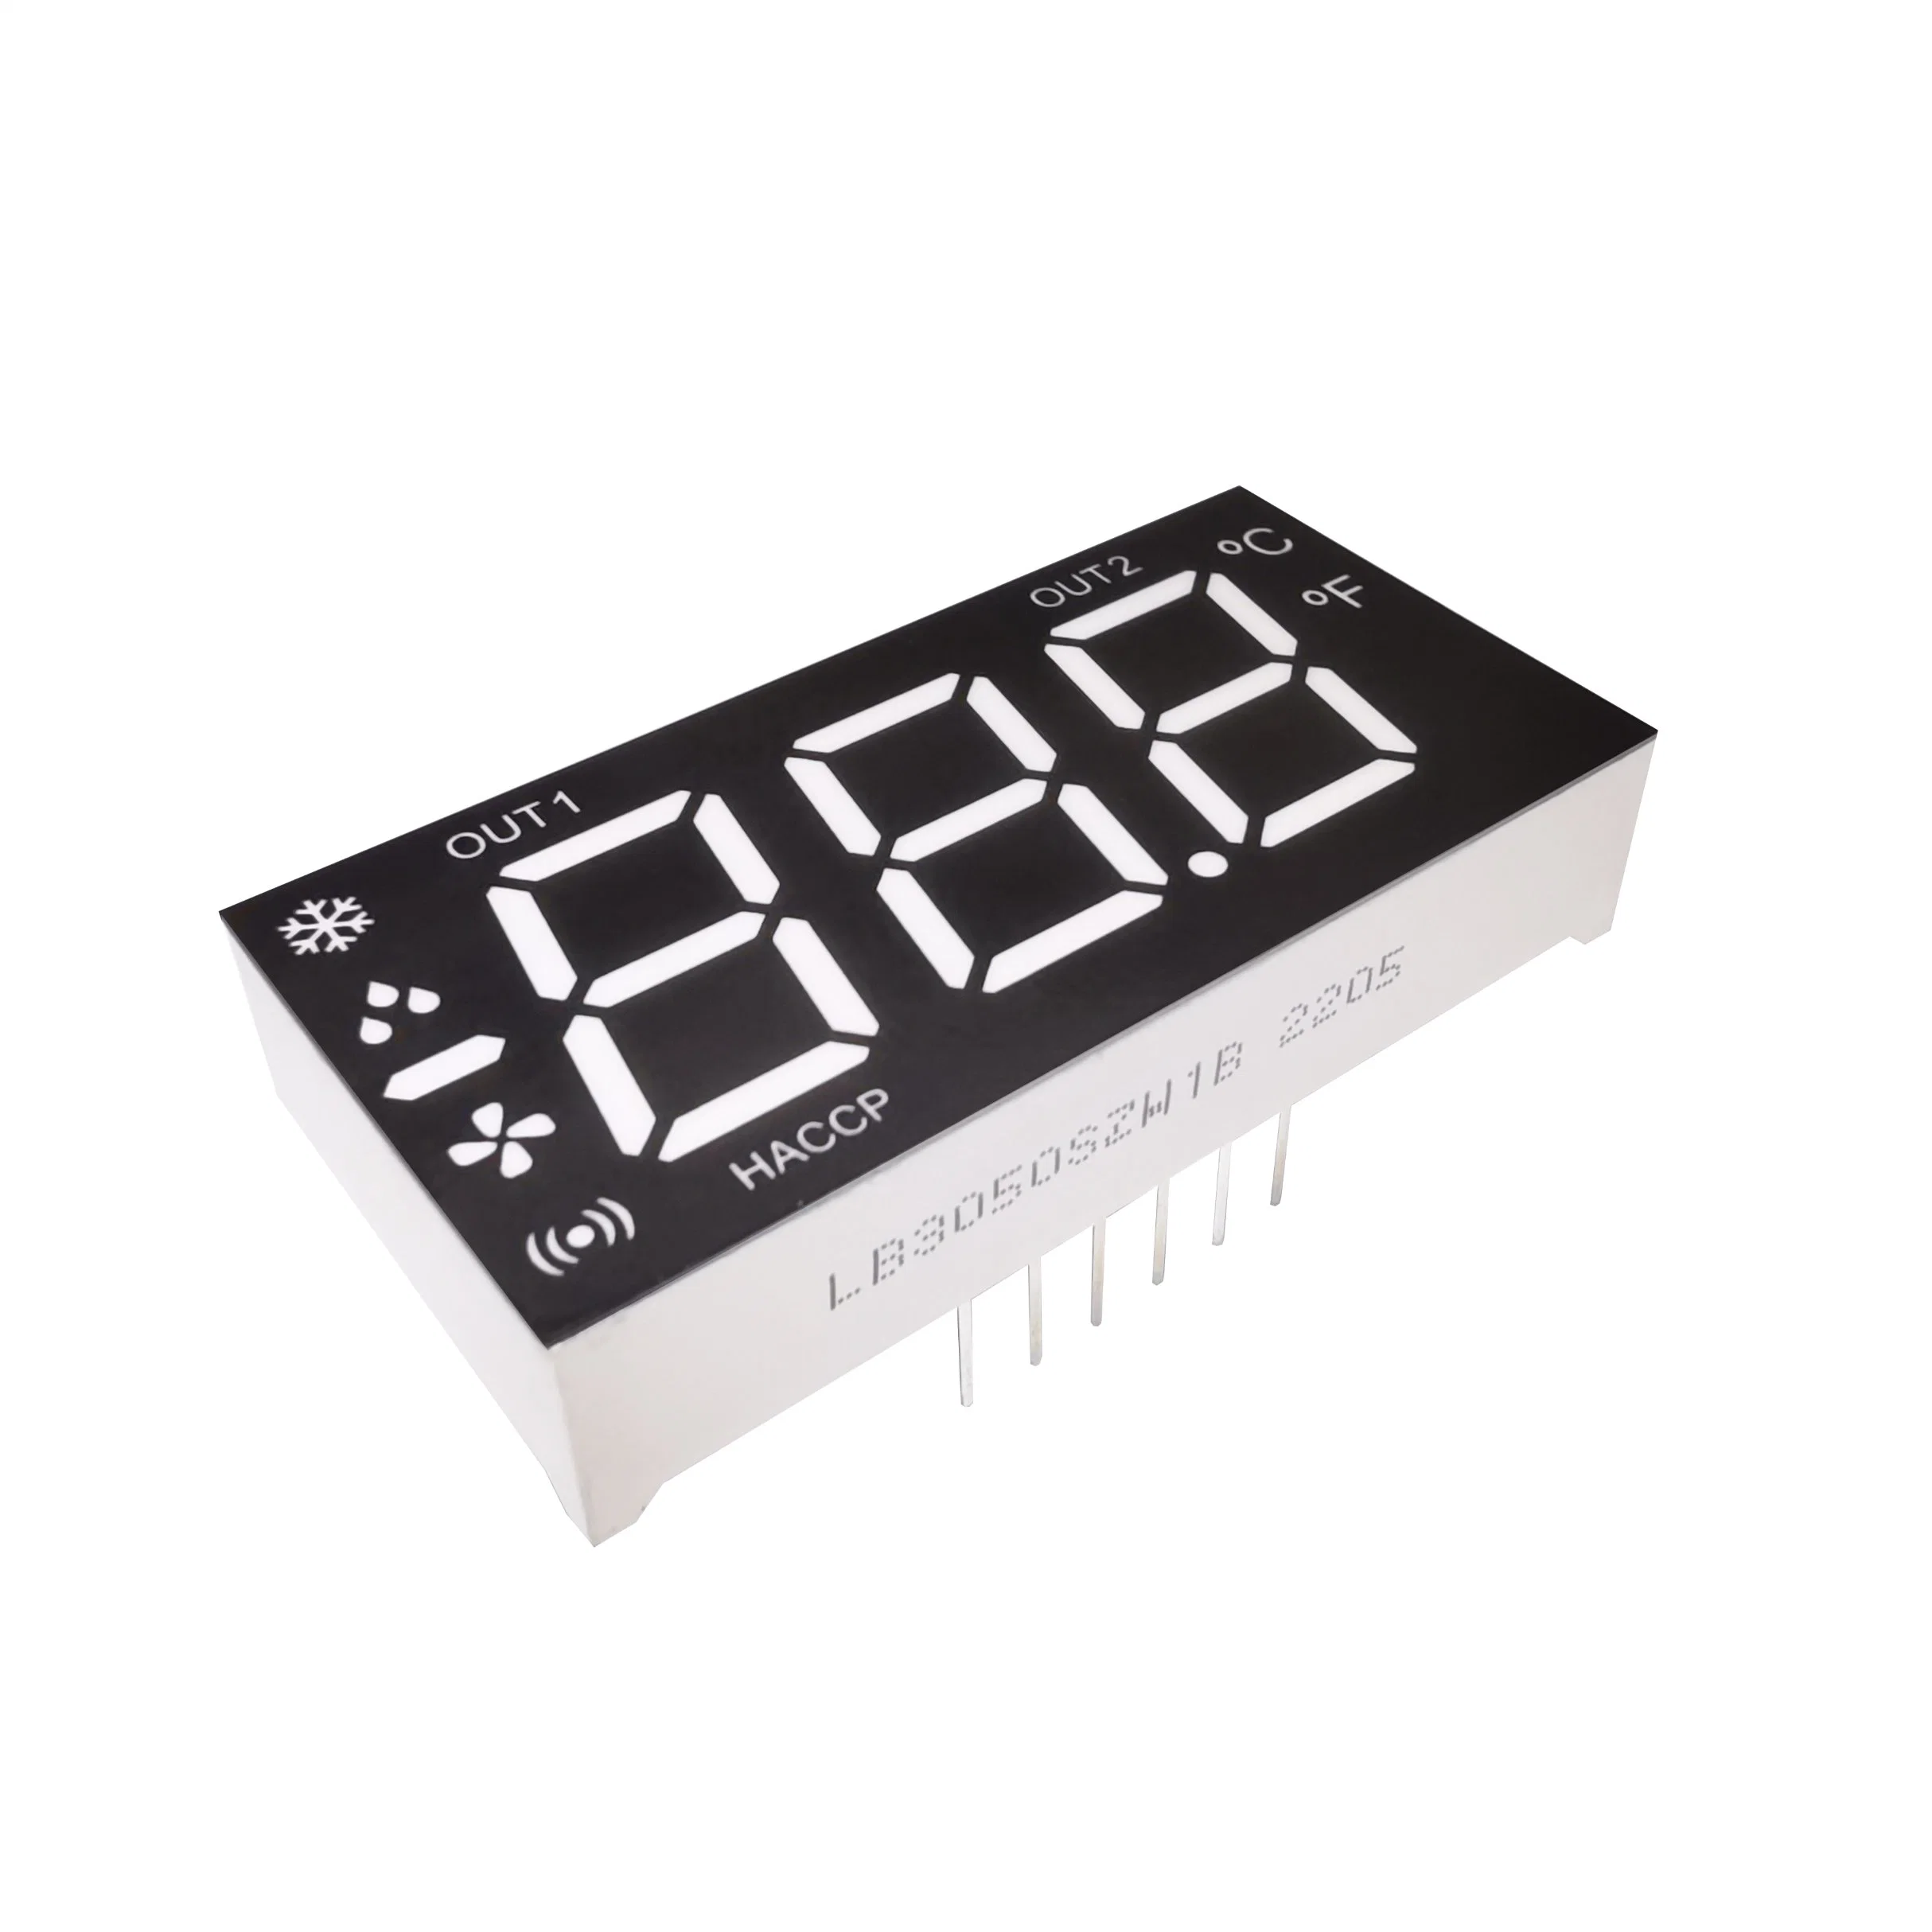 Bright White Customized 3digit 0.5inch Seven Segment LED Display for Refrigerator Control